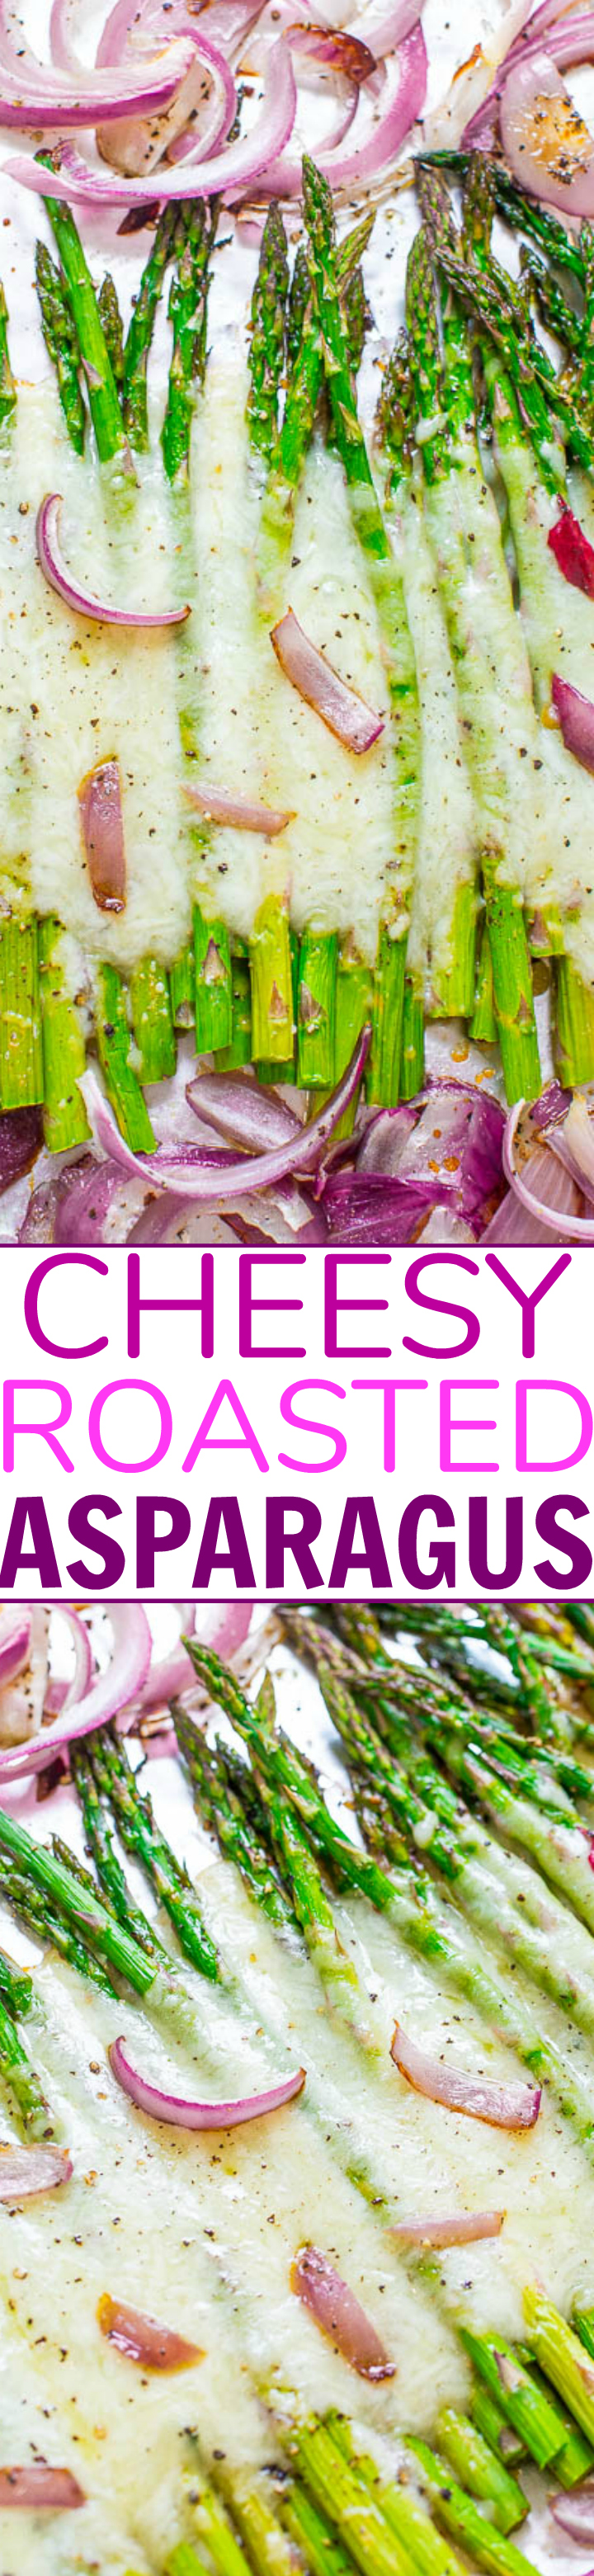 Roasted Cheesy Asparagus — Even picky eaters will LOVE asparagus when it's roasted with onions and covered with melted CHEESE!! A fast and EASY side that's perfect for busy weeknights!!